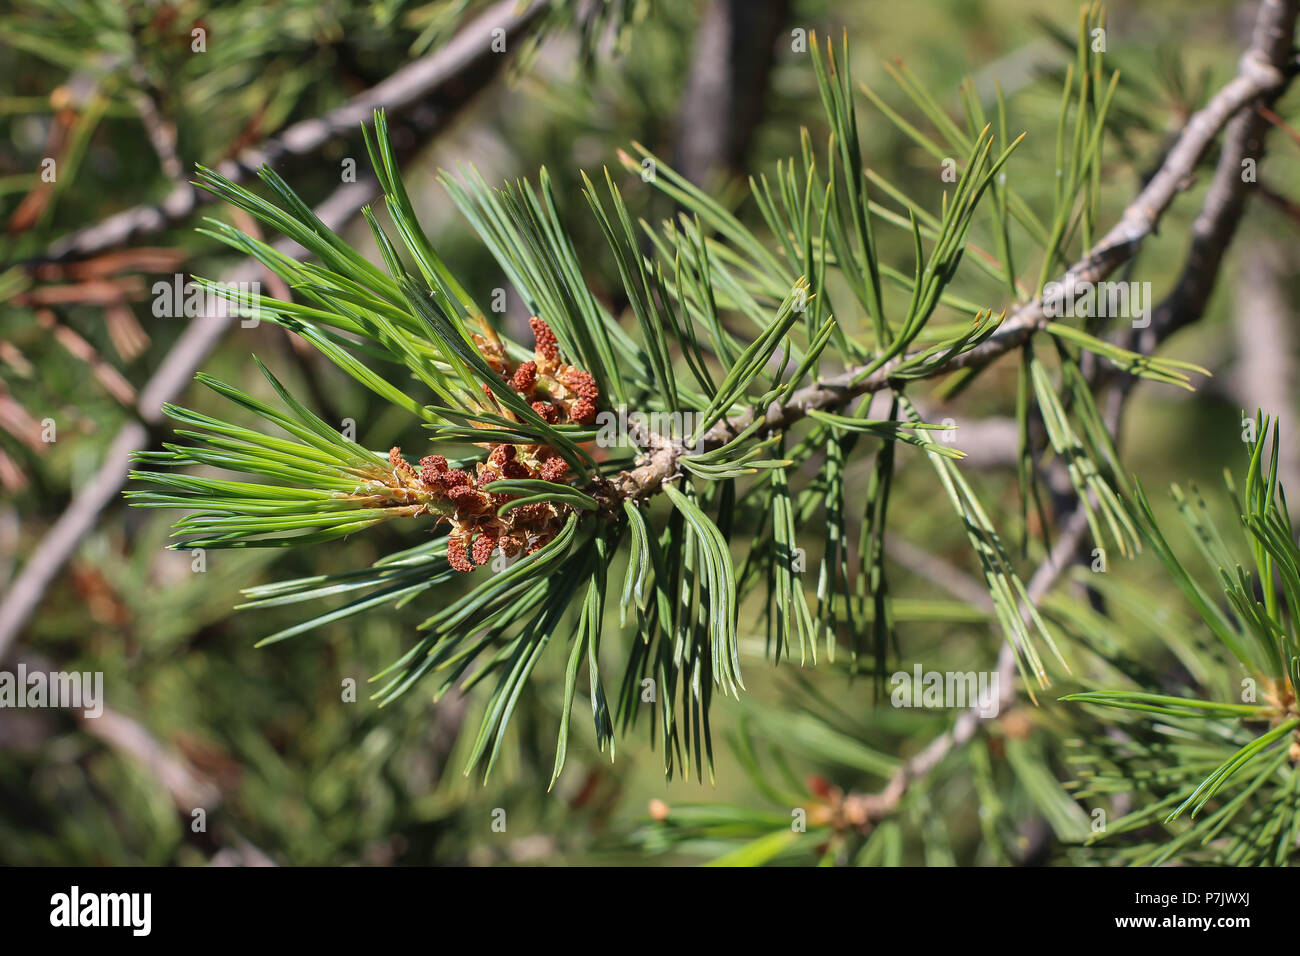 Branch of Pinus peuce with leaves (needles) in fascicles (bundles) of five Stock Photo